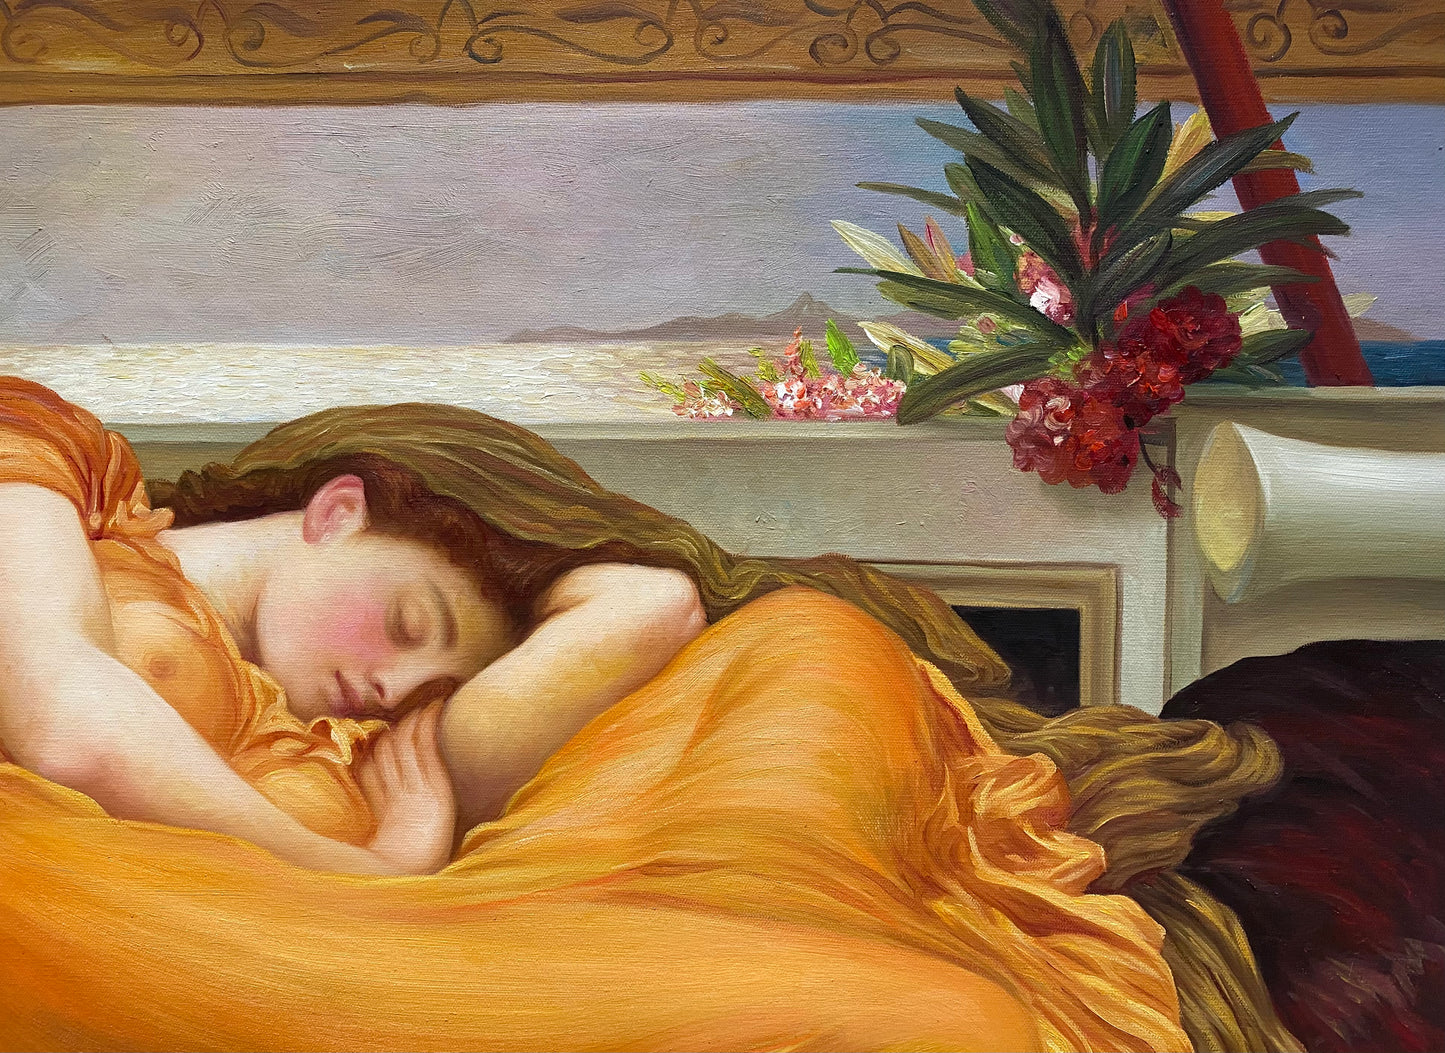 Flaming June Painting by Frederic Leighton Oil Painting Hand Painted on Canvas Wall Art Decor Unframed